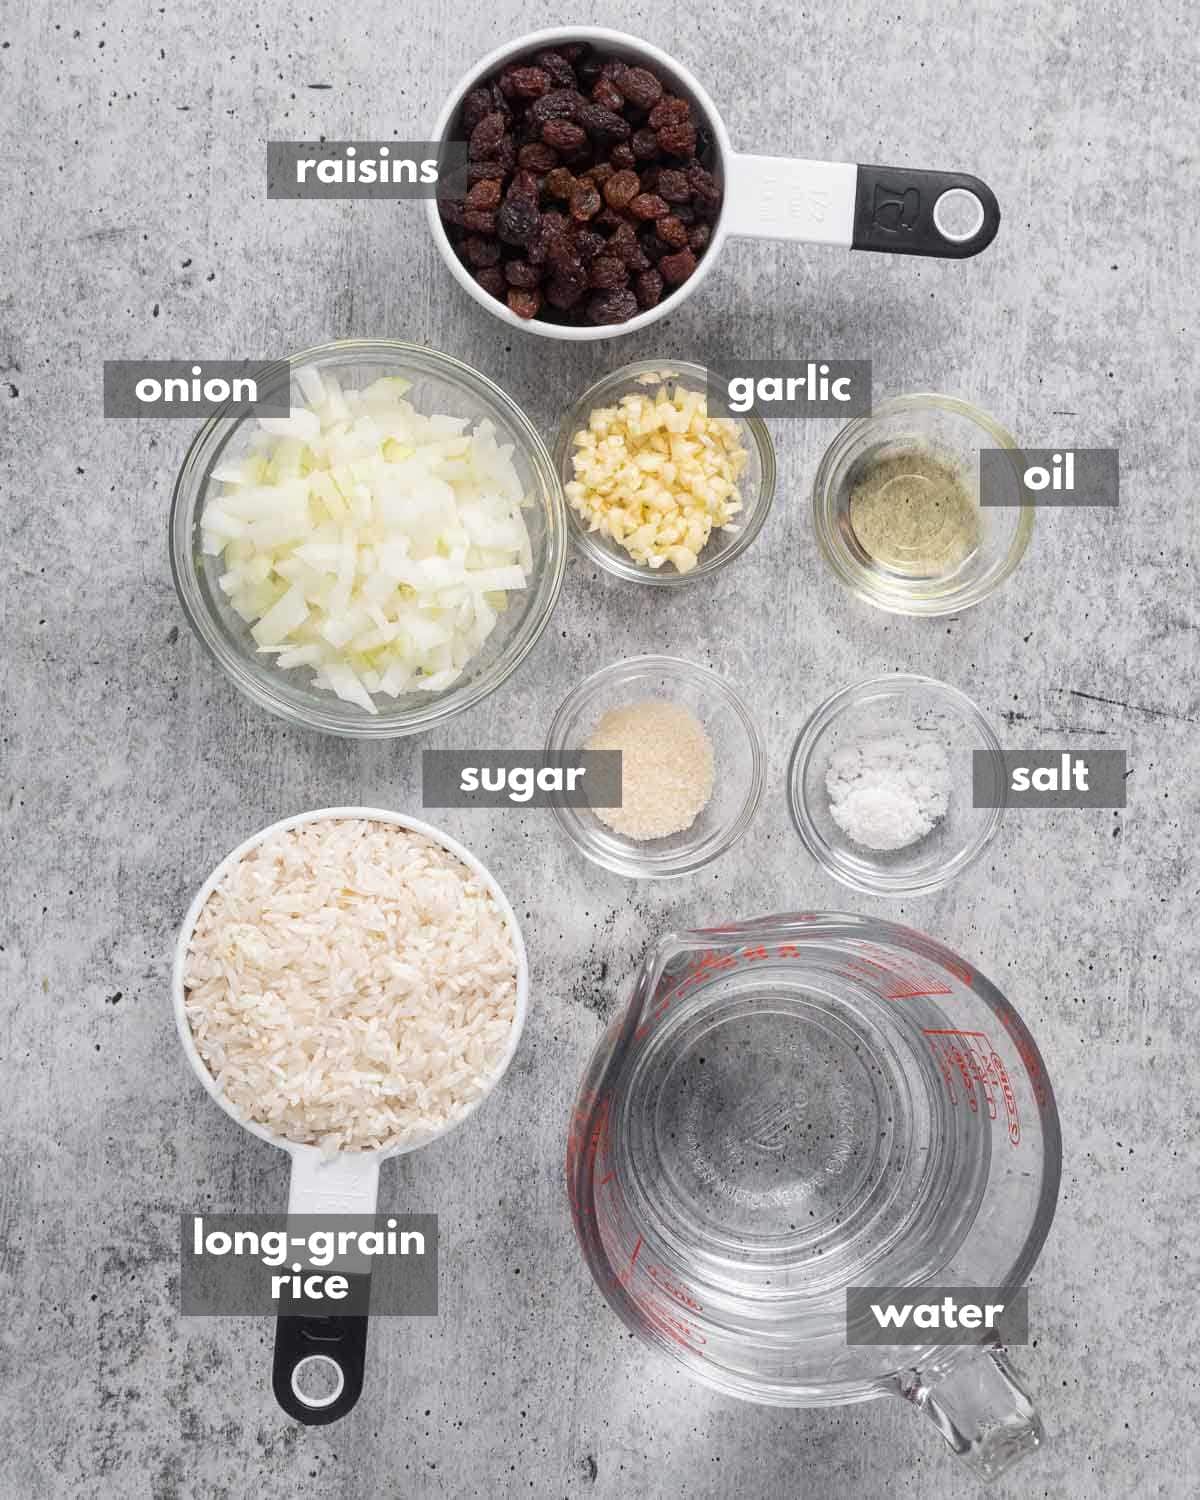 Ingredients portioned out for making rice with raisins.